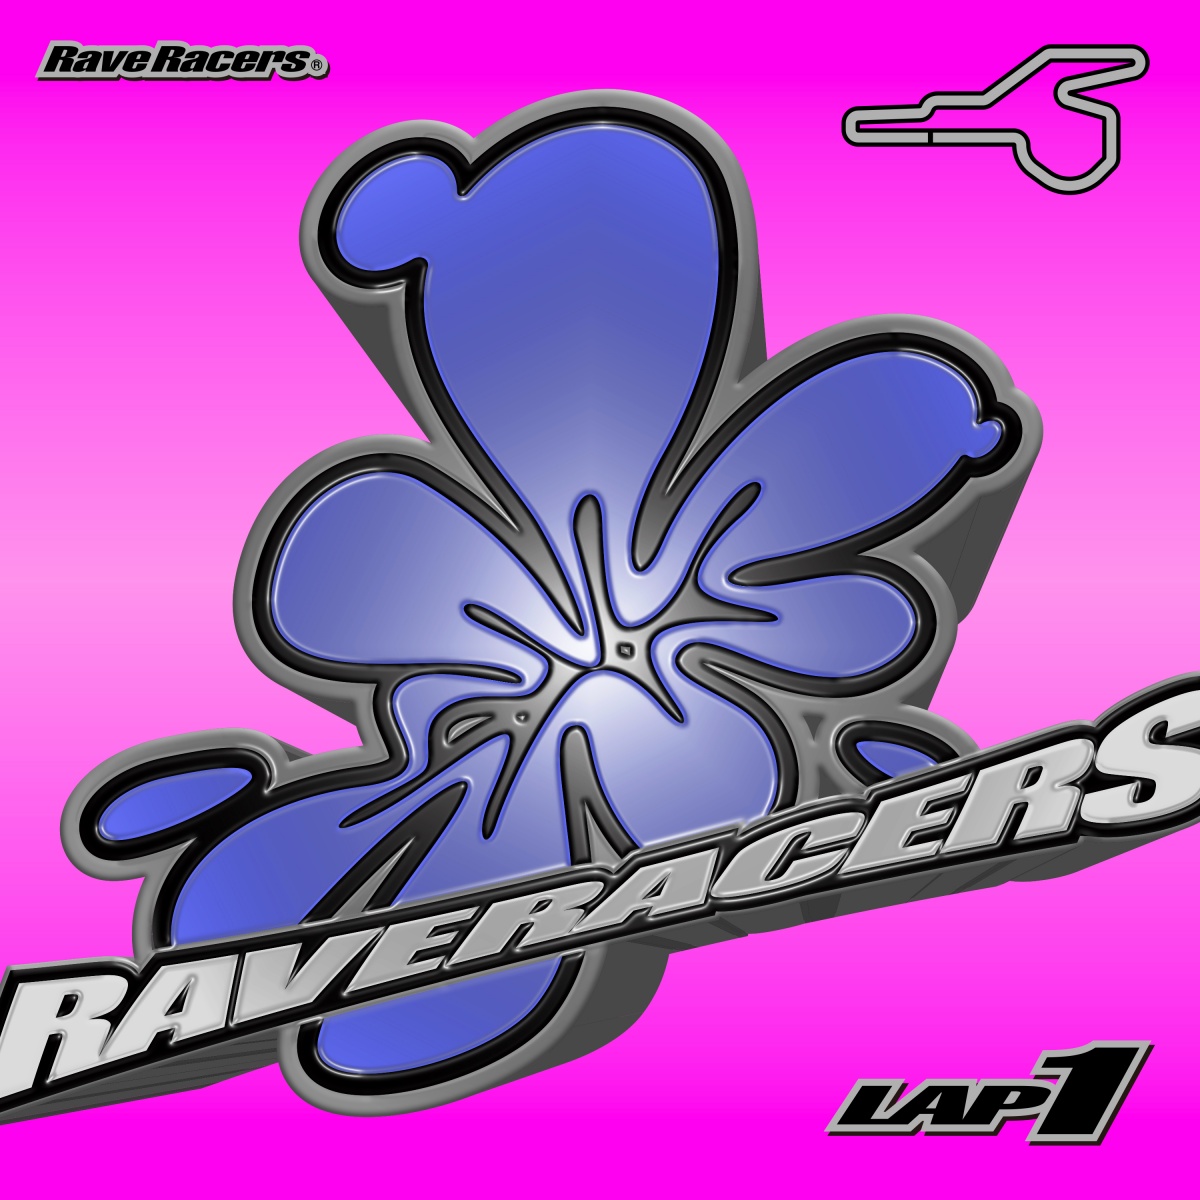 rave racers